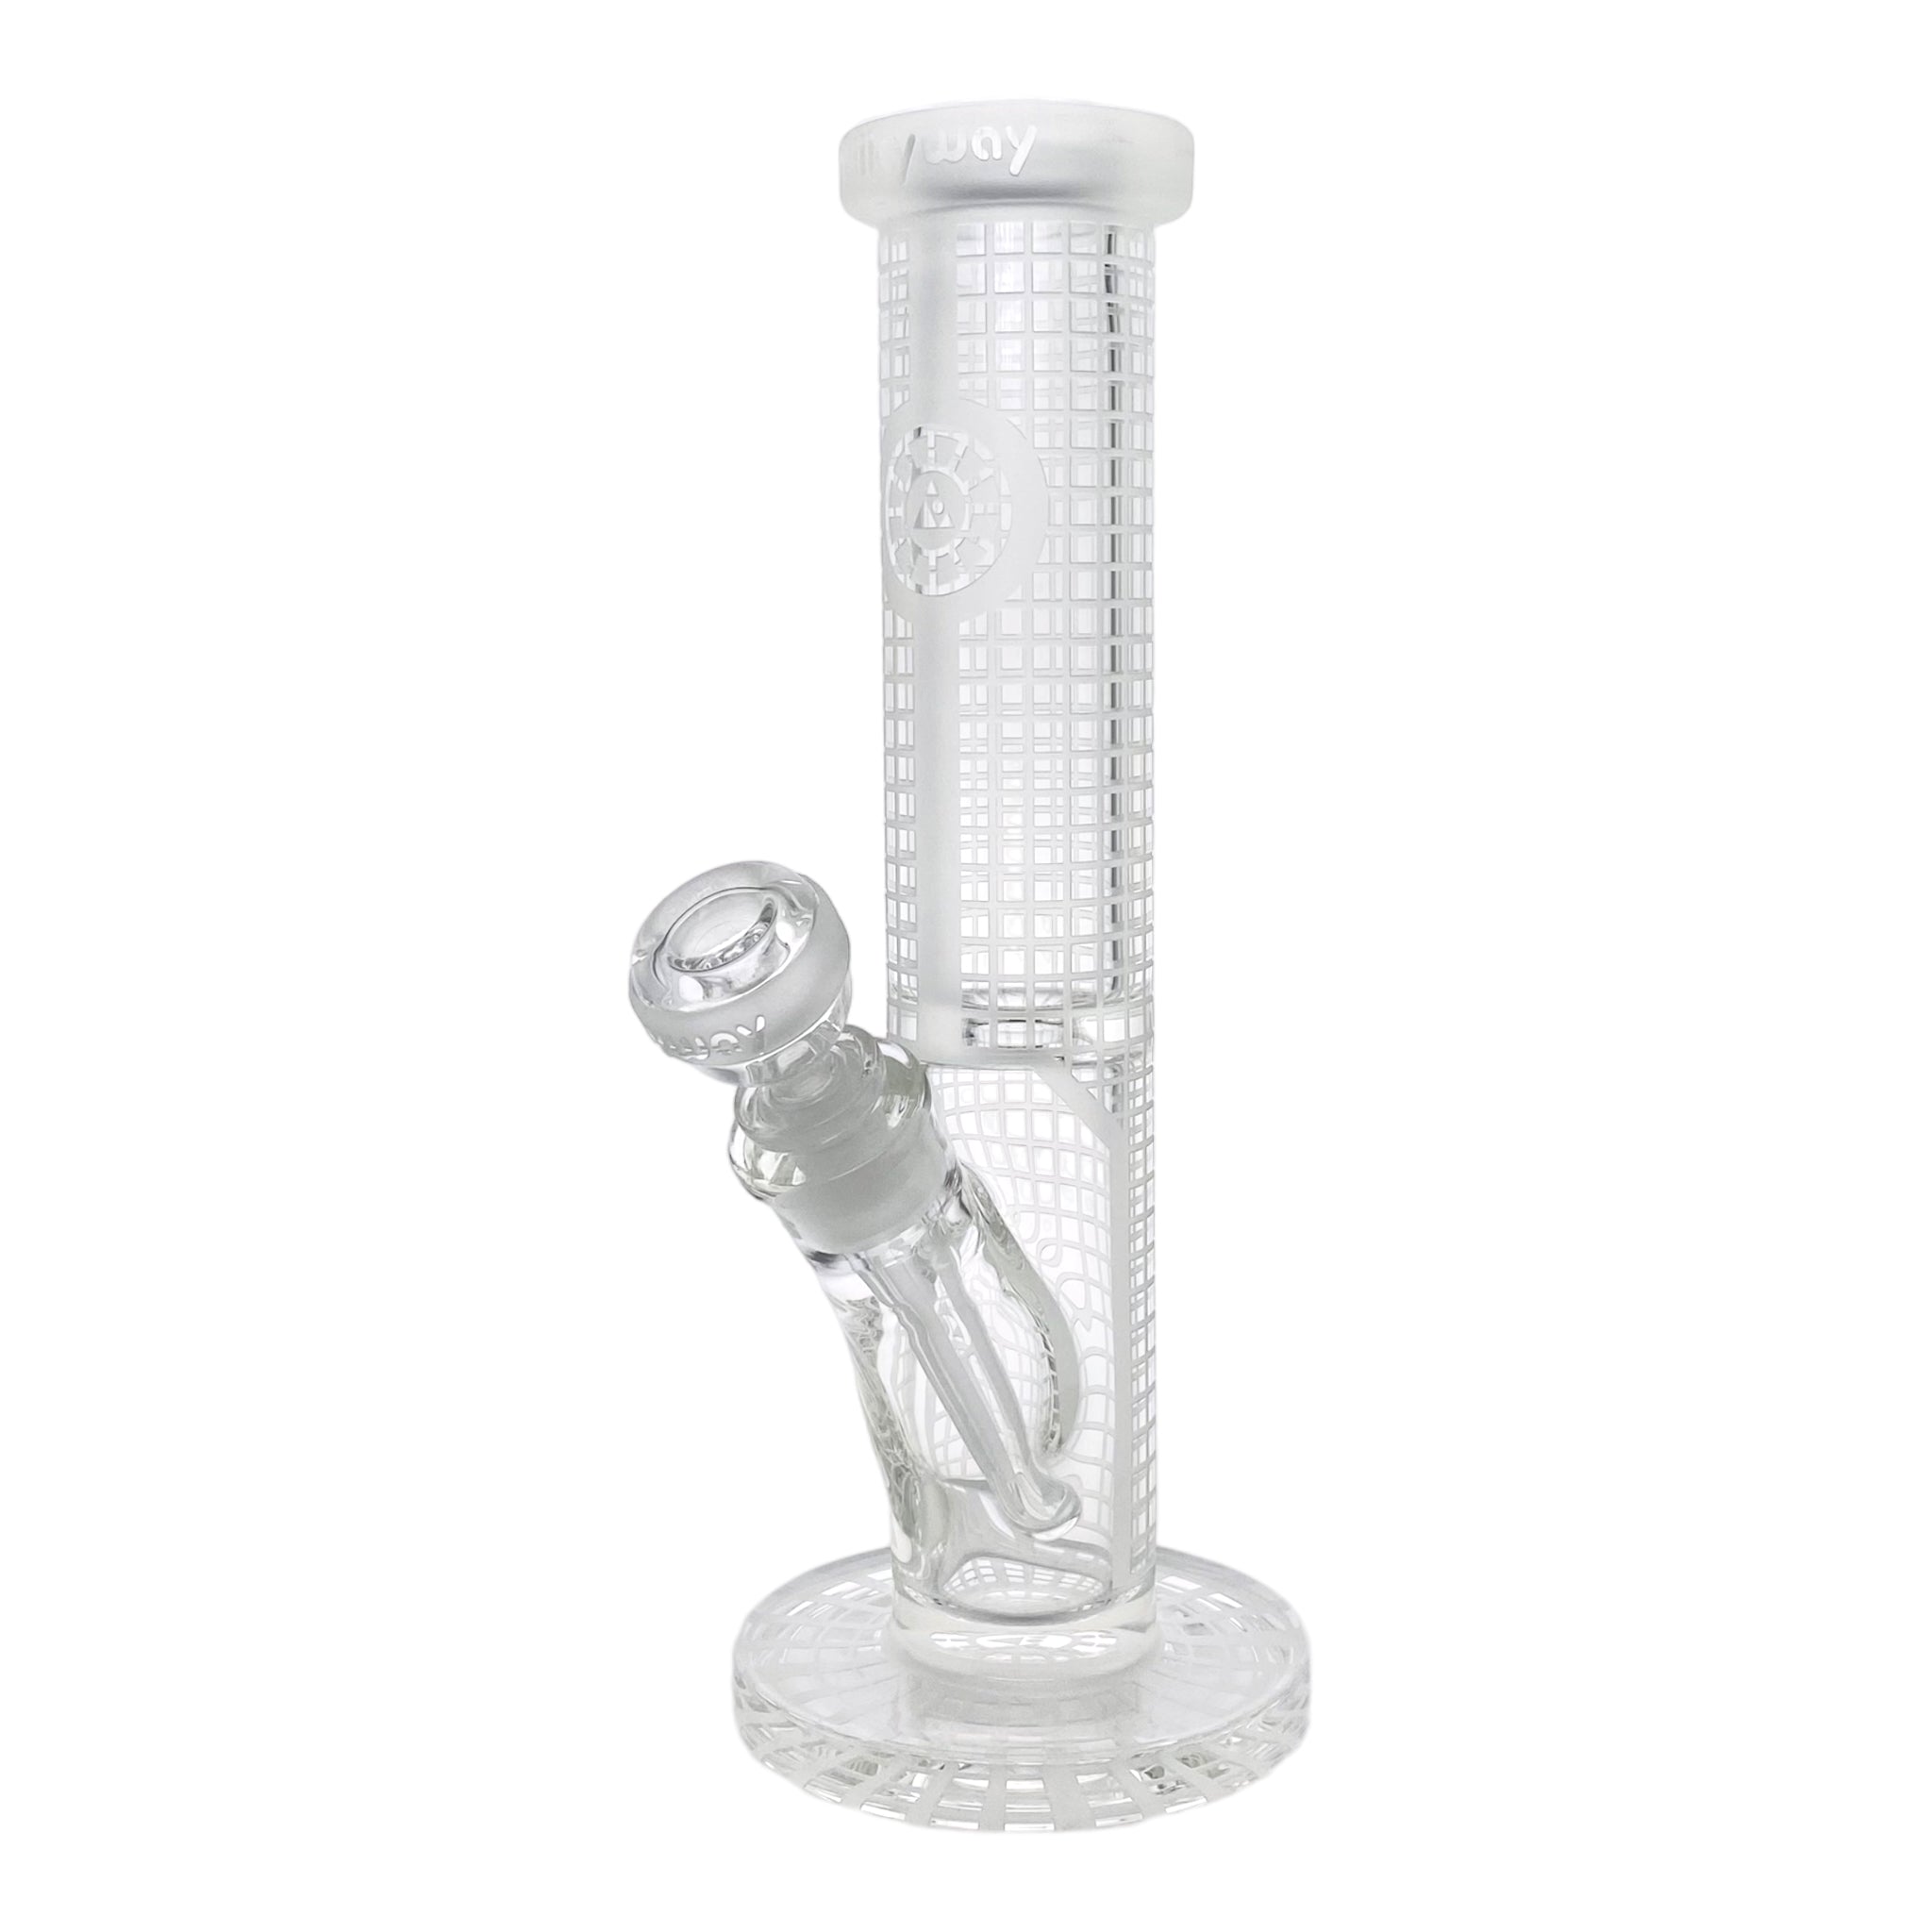 Milkyway Glass 12 Inch "Squared" Straight Tube Glass Bong